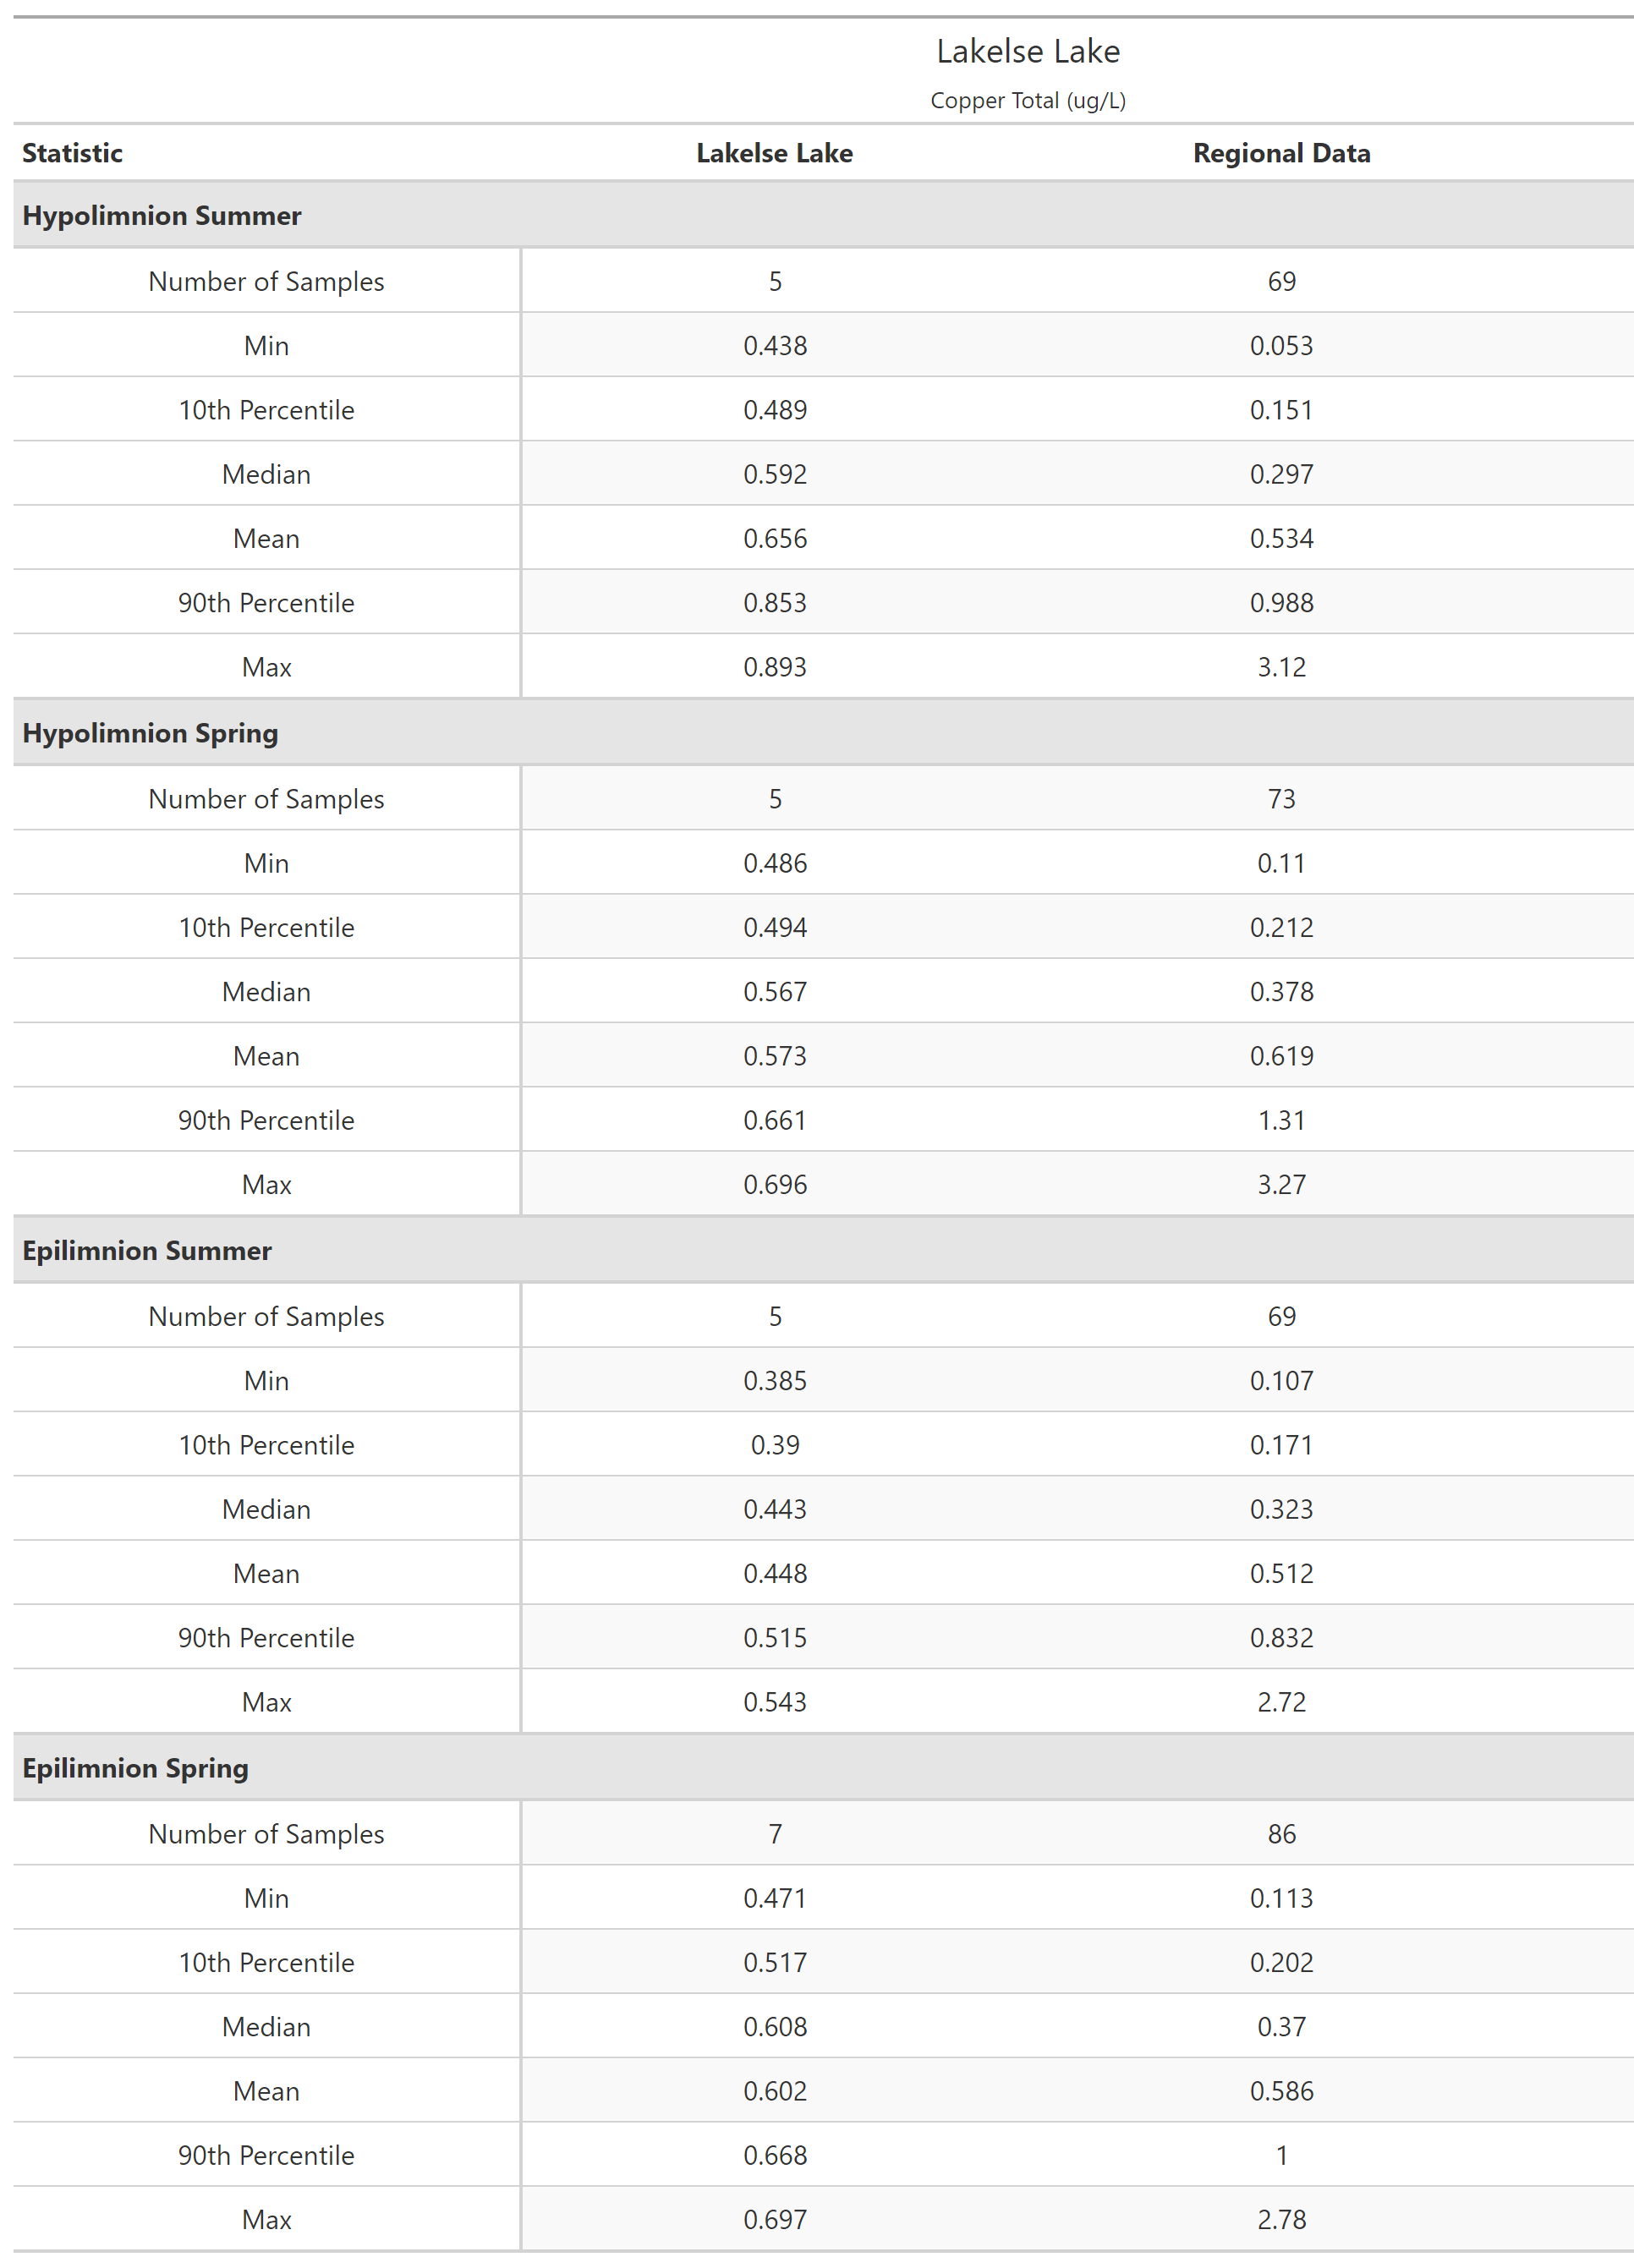 A table of summary statistics for Copper Total with comparison to regional data